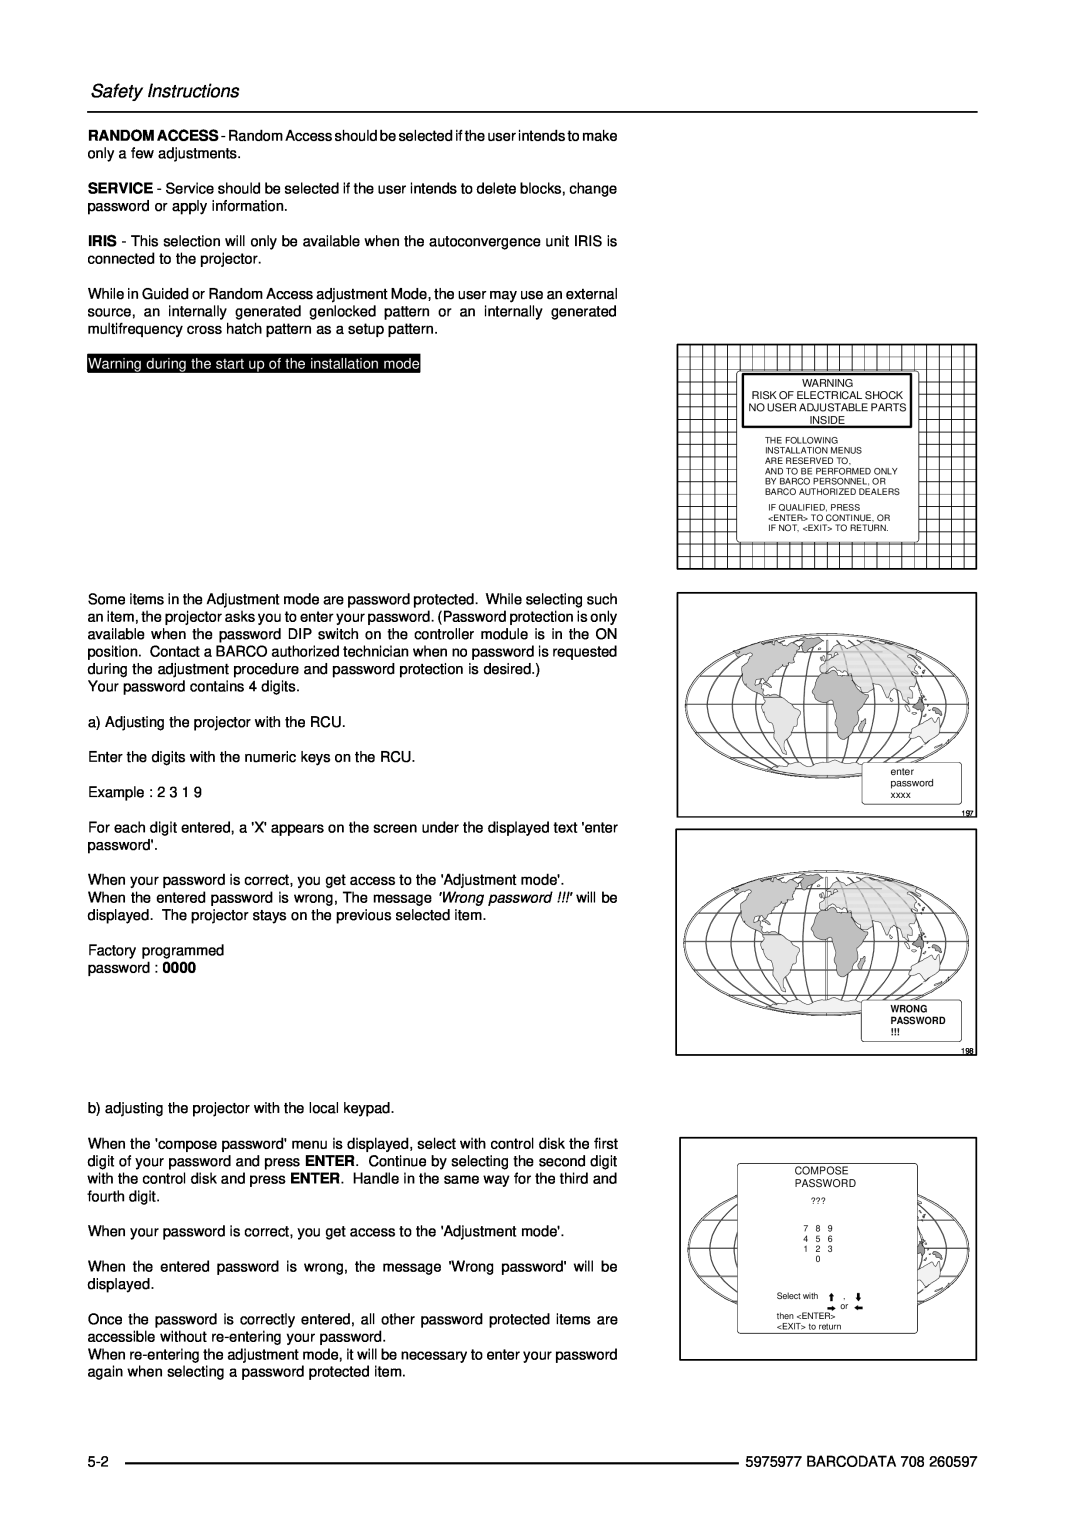 Barco R9002120 manual Safety Instructions, Warning during the start up of the installation mode, Compose, Password 